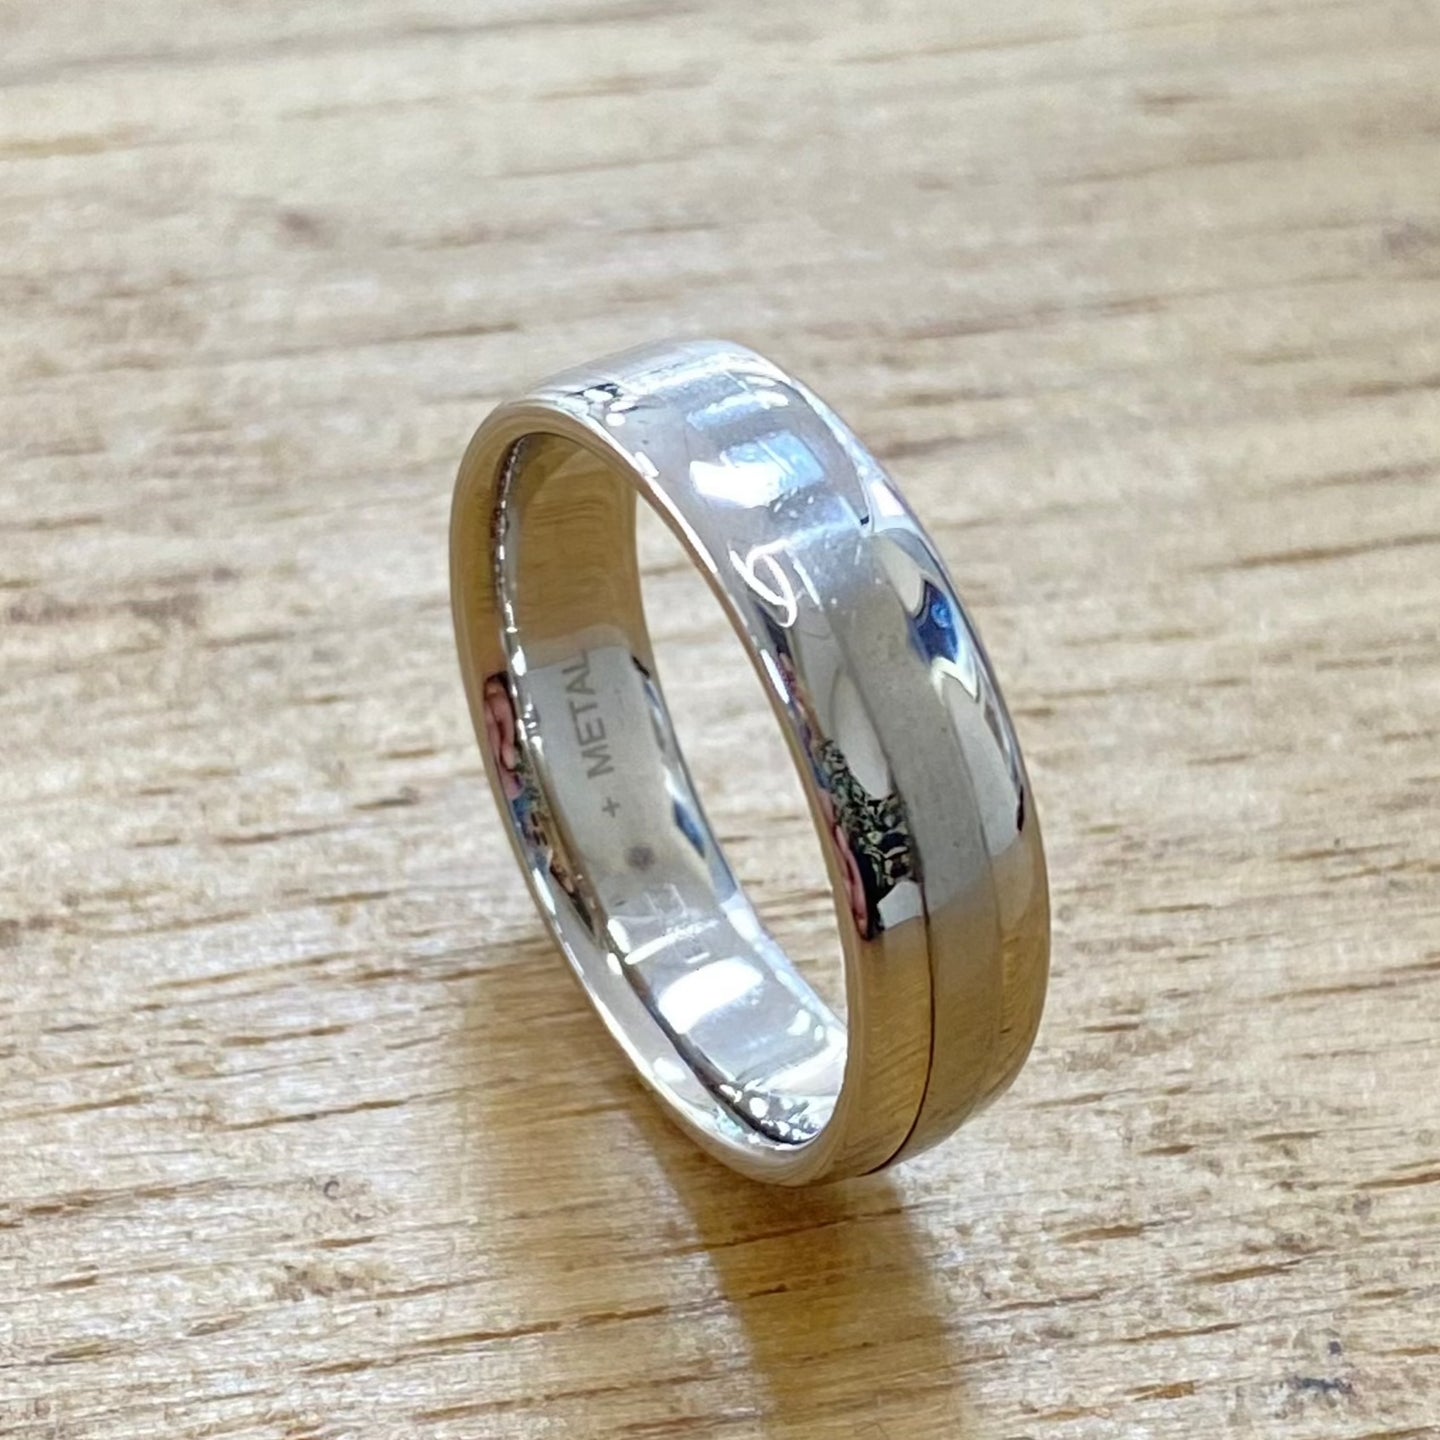 Preloved 18ct White Gold and Titanium 6mm Band Ring